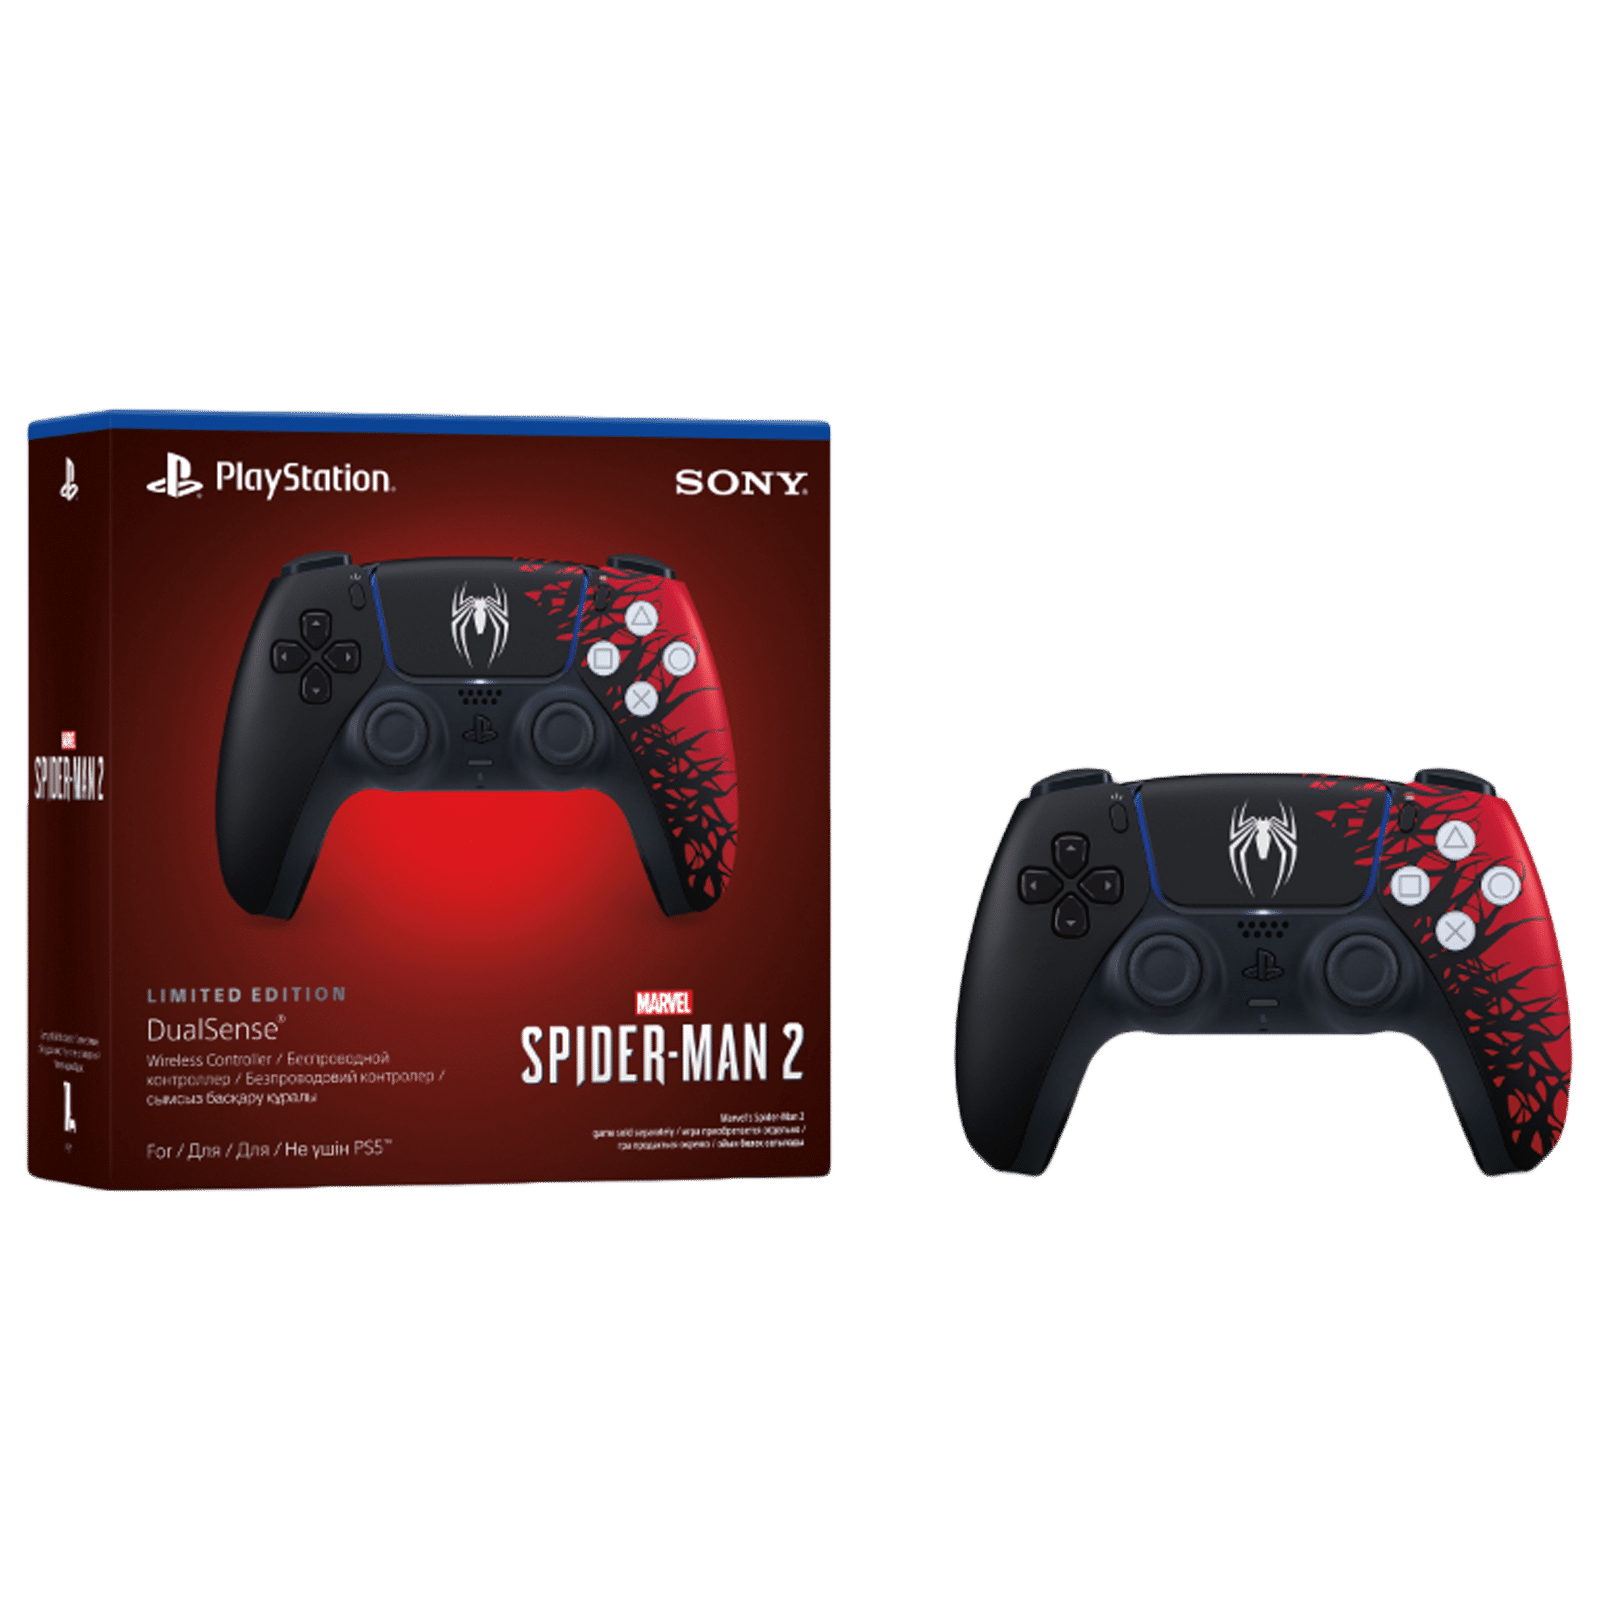 Buy SONY DualSense MSM2 LE Wireless Controller for Playstation 5  (CFI-ZCT1WZ2, Black and Red) Online - Croma